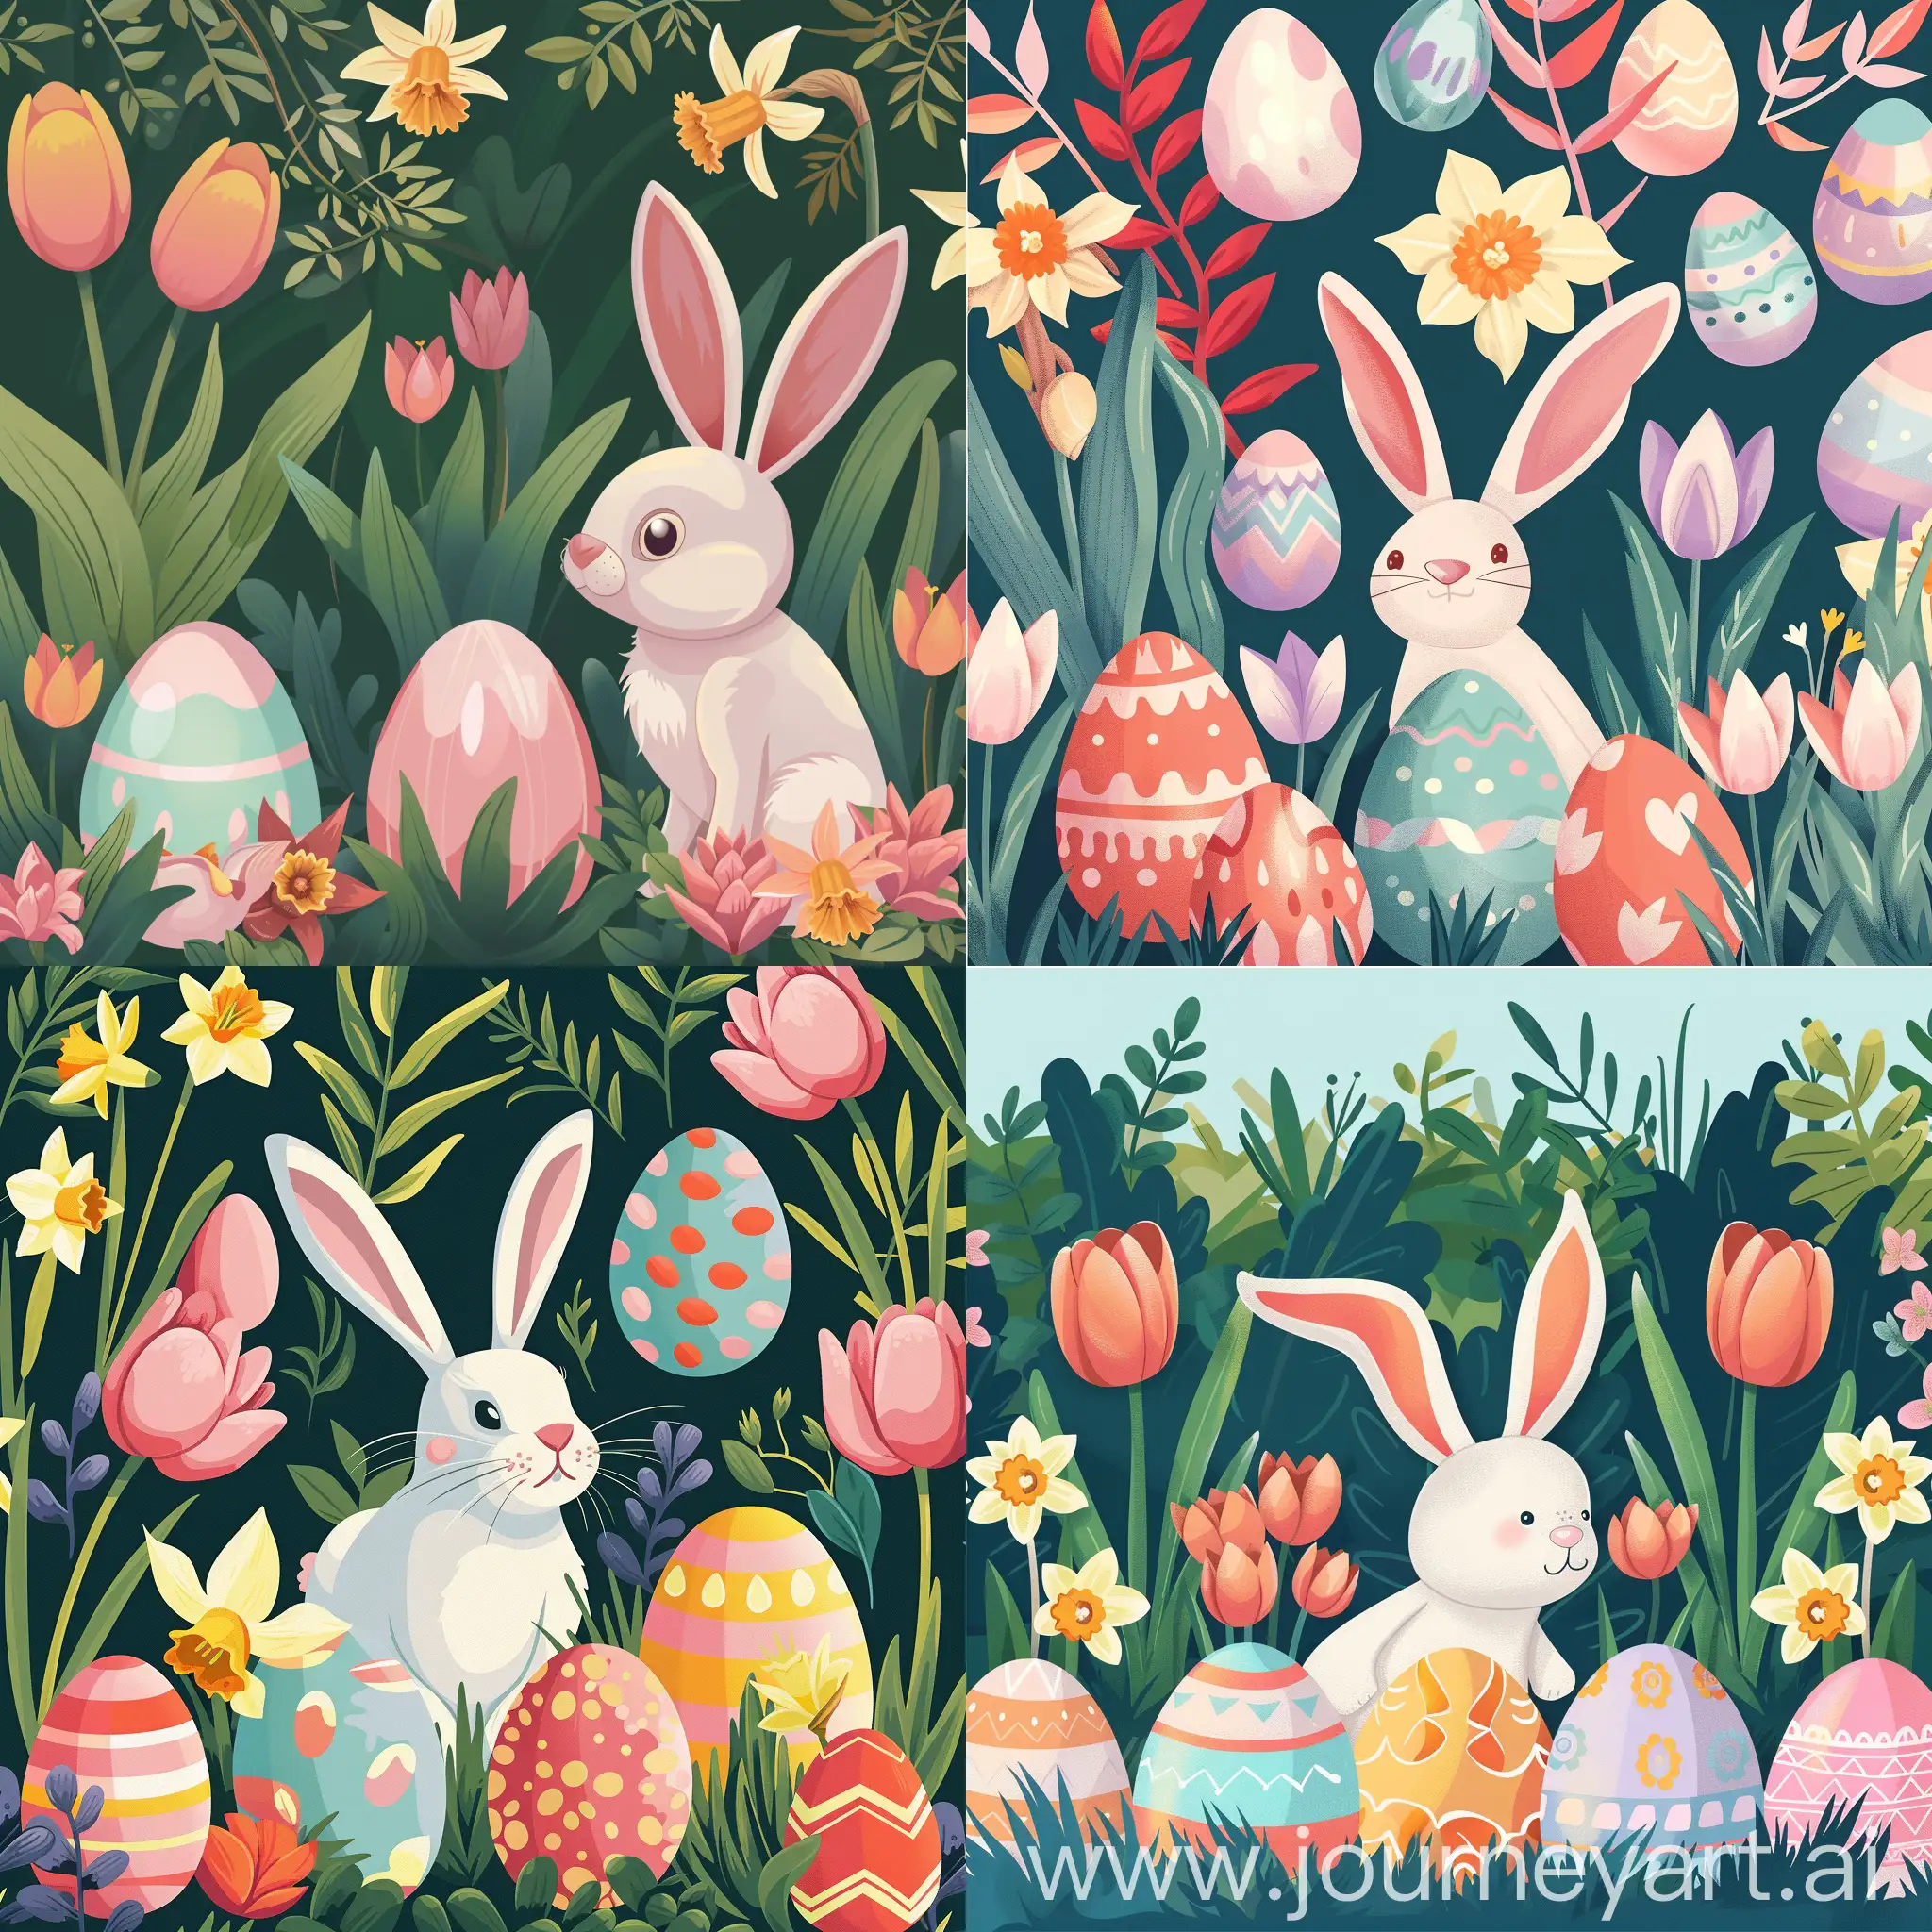 Enchanting-Easter-Bunny-and-Spring-Flowers-Illustration